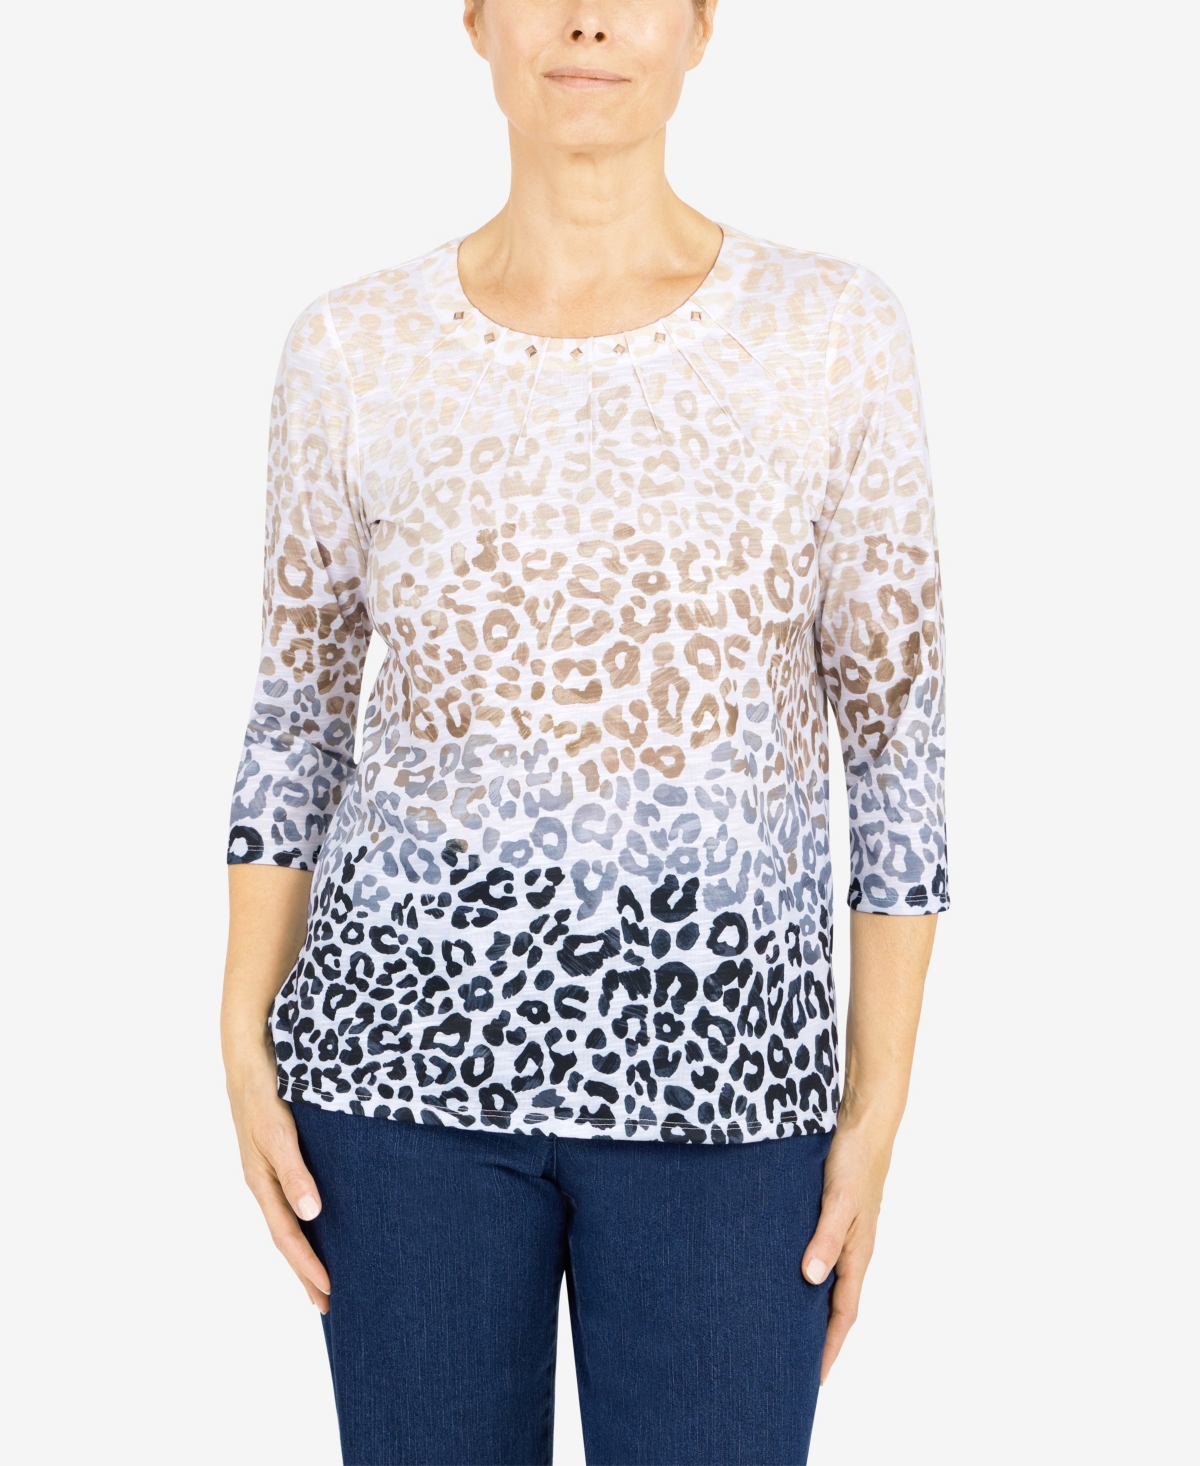 ALFRED DUNNER PETITE CLASSICS ANIMAL OMBRE KNIT TOP